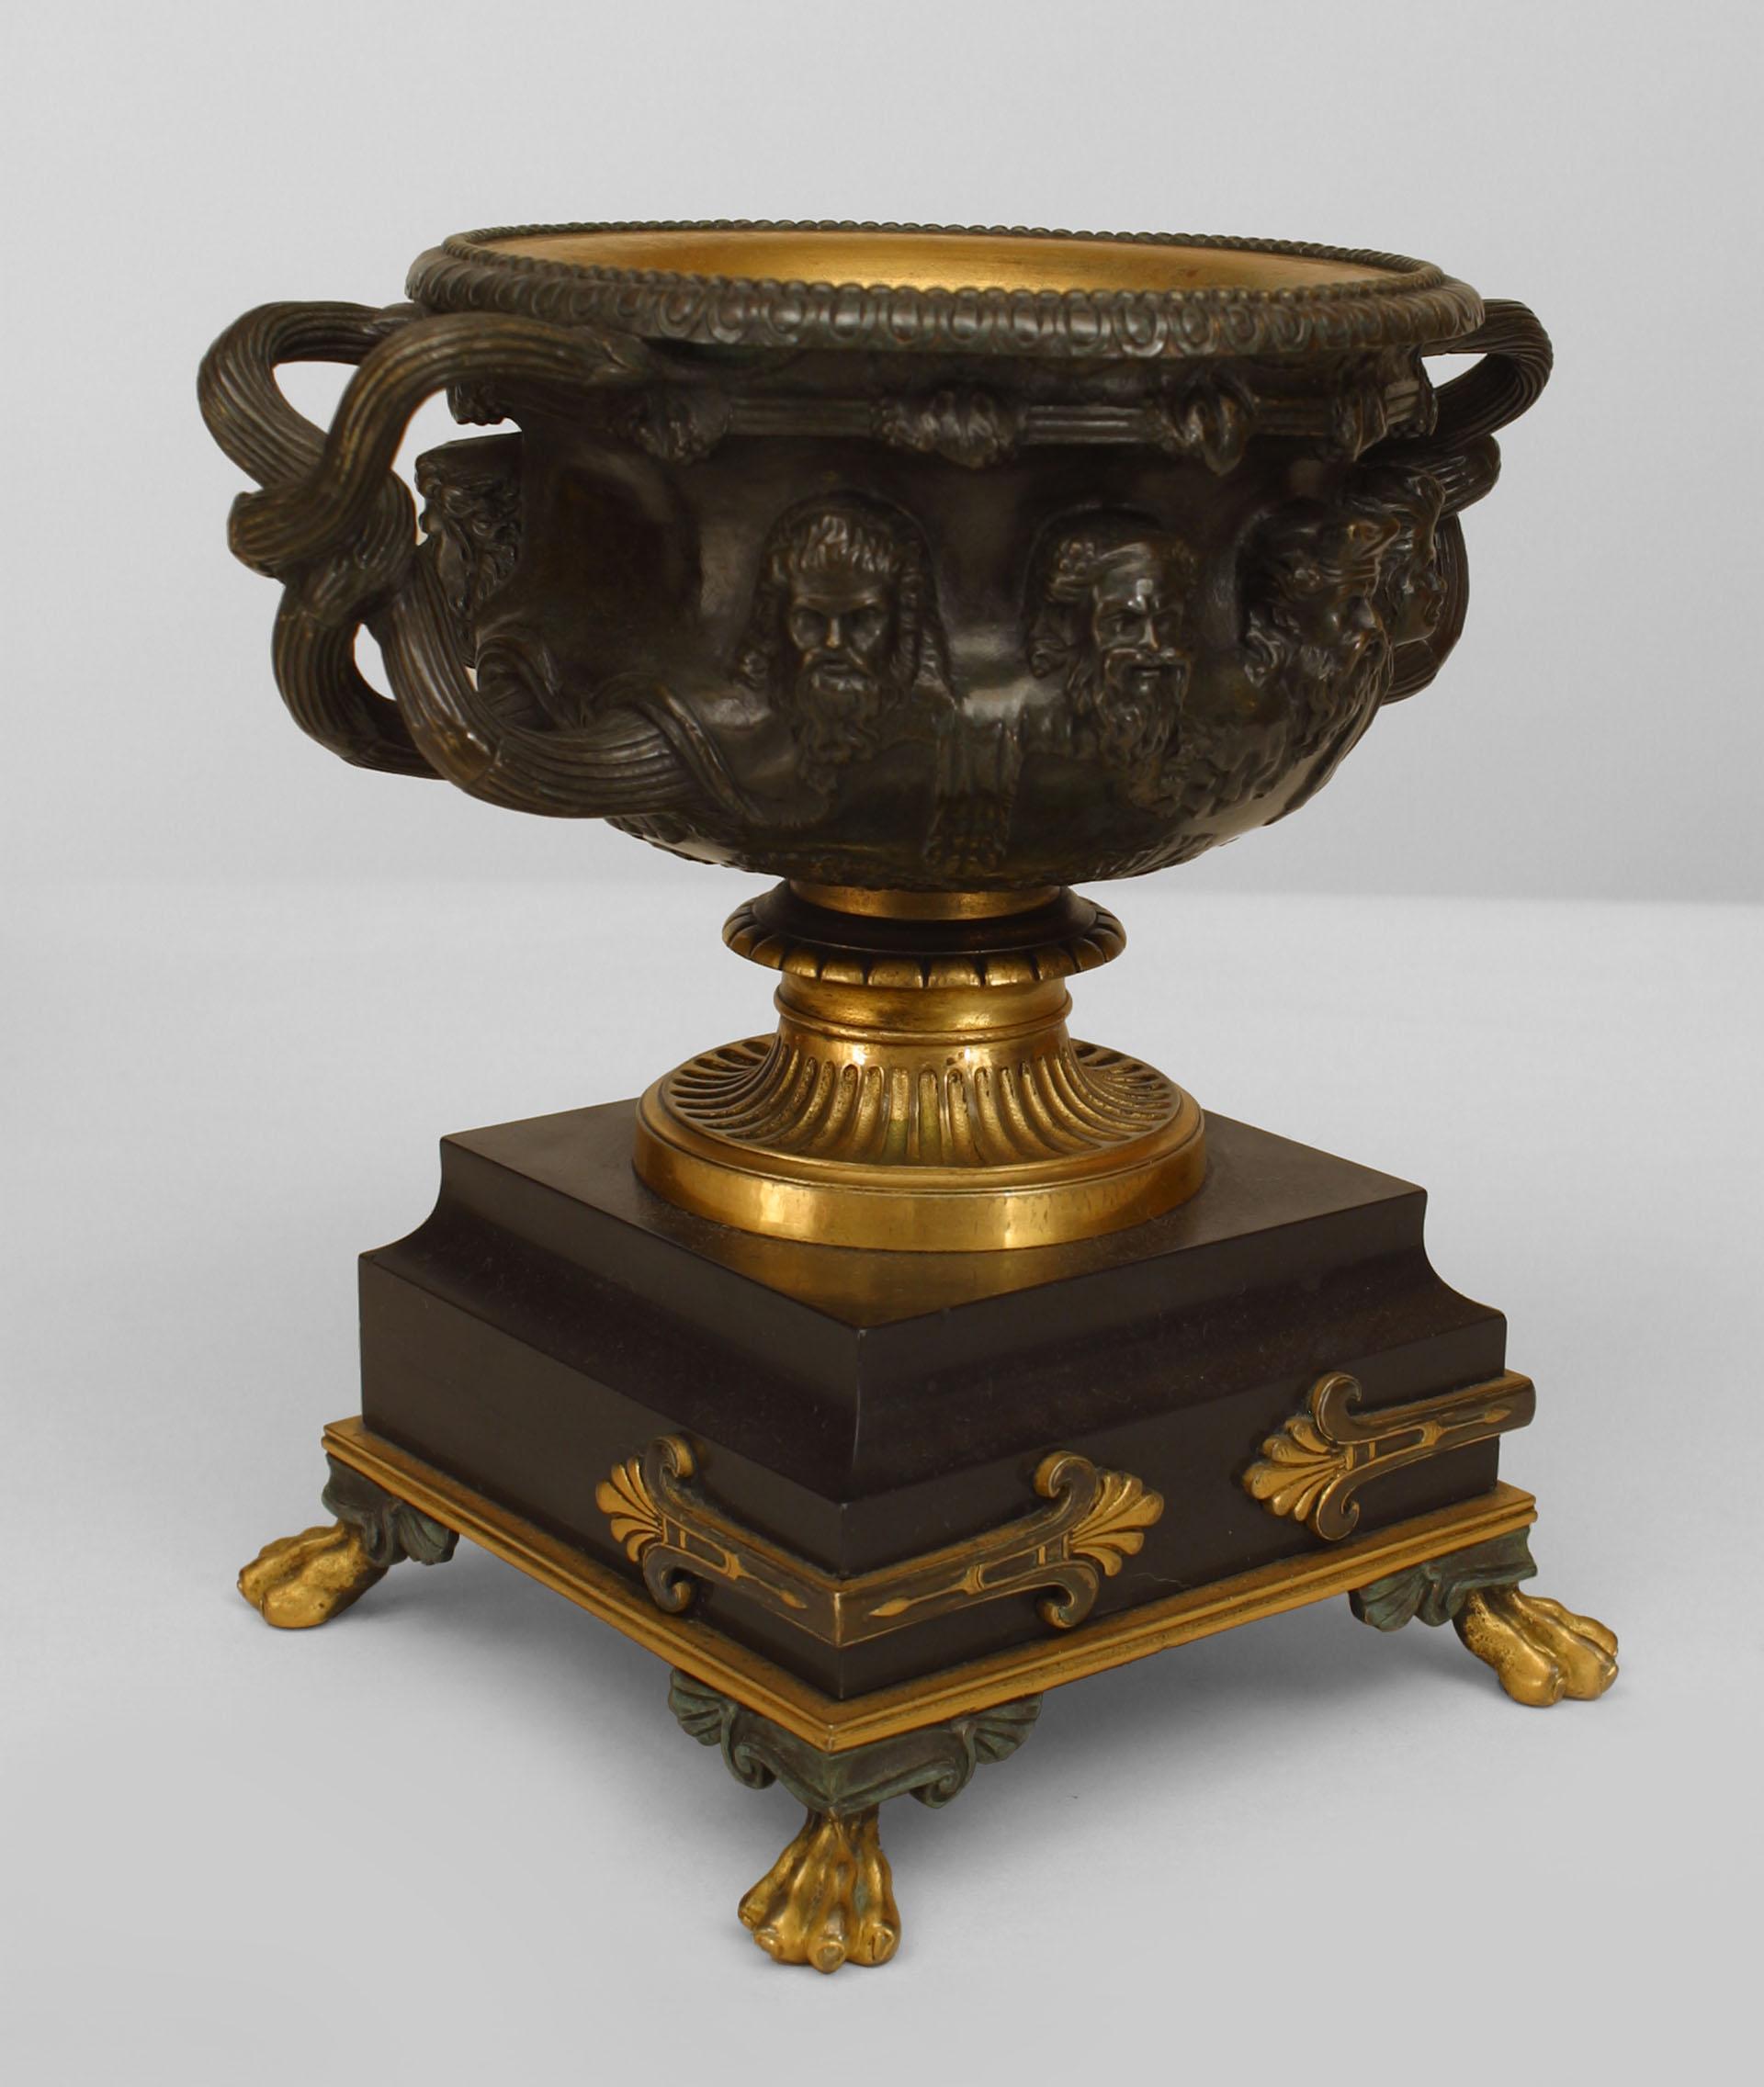 Pair of Italian neoclassical (19th century) bronze and gilt trimmed urns surrounded by Greek masks and having intertwined handles resting on a square black marble base over claw feet.